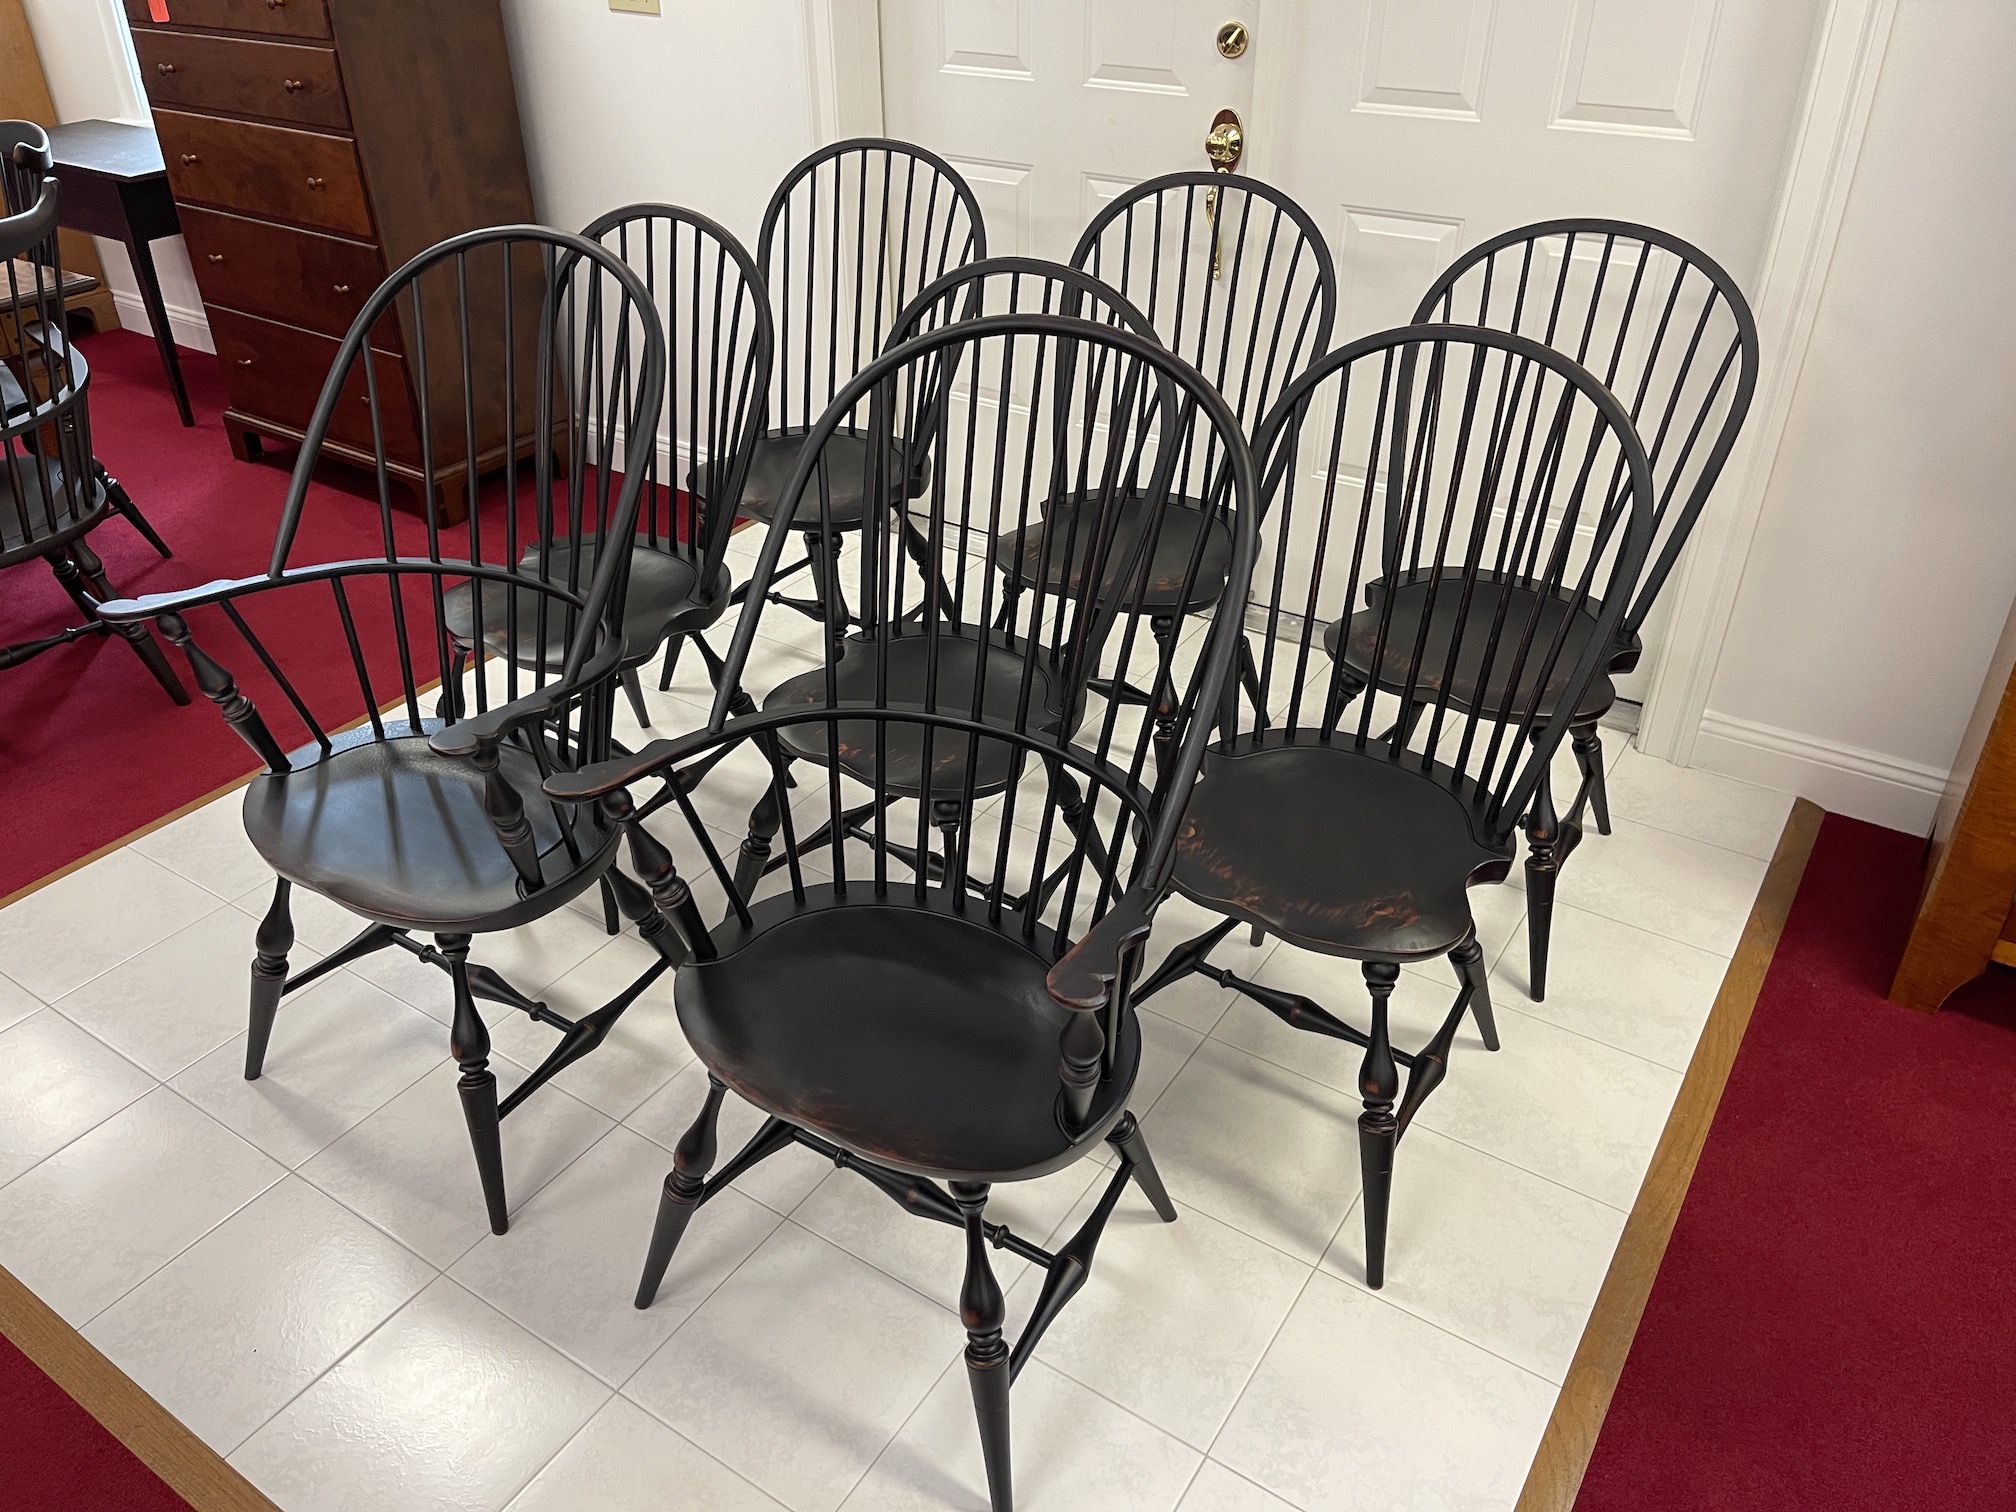 Set of 8 Windsor Chairs in Antique Black over Red Crackle Finish Image